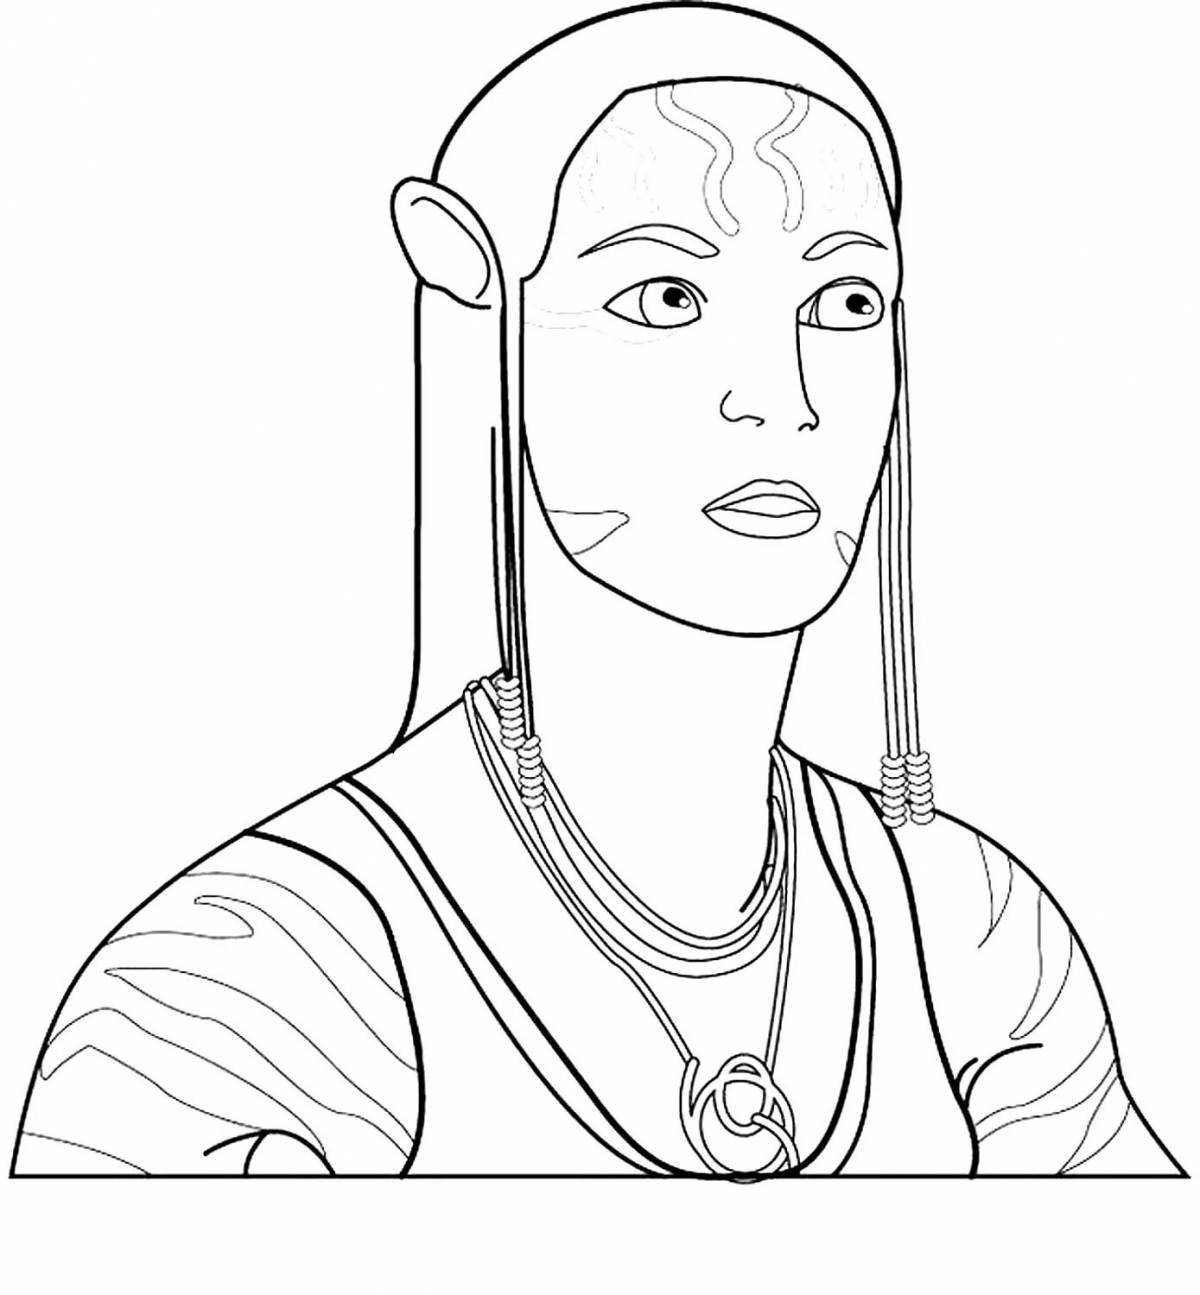 Great neytiri avatar coloring page